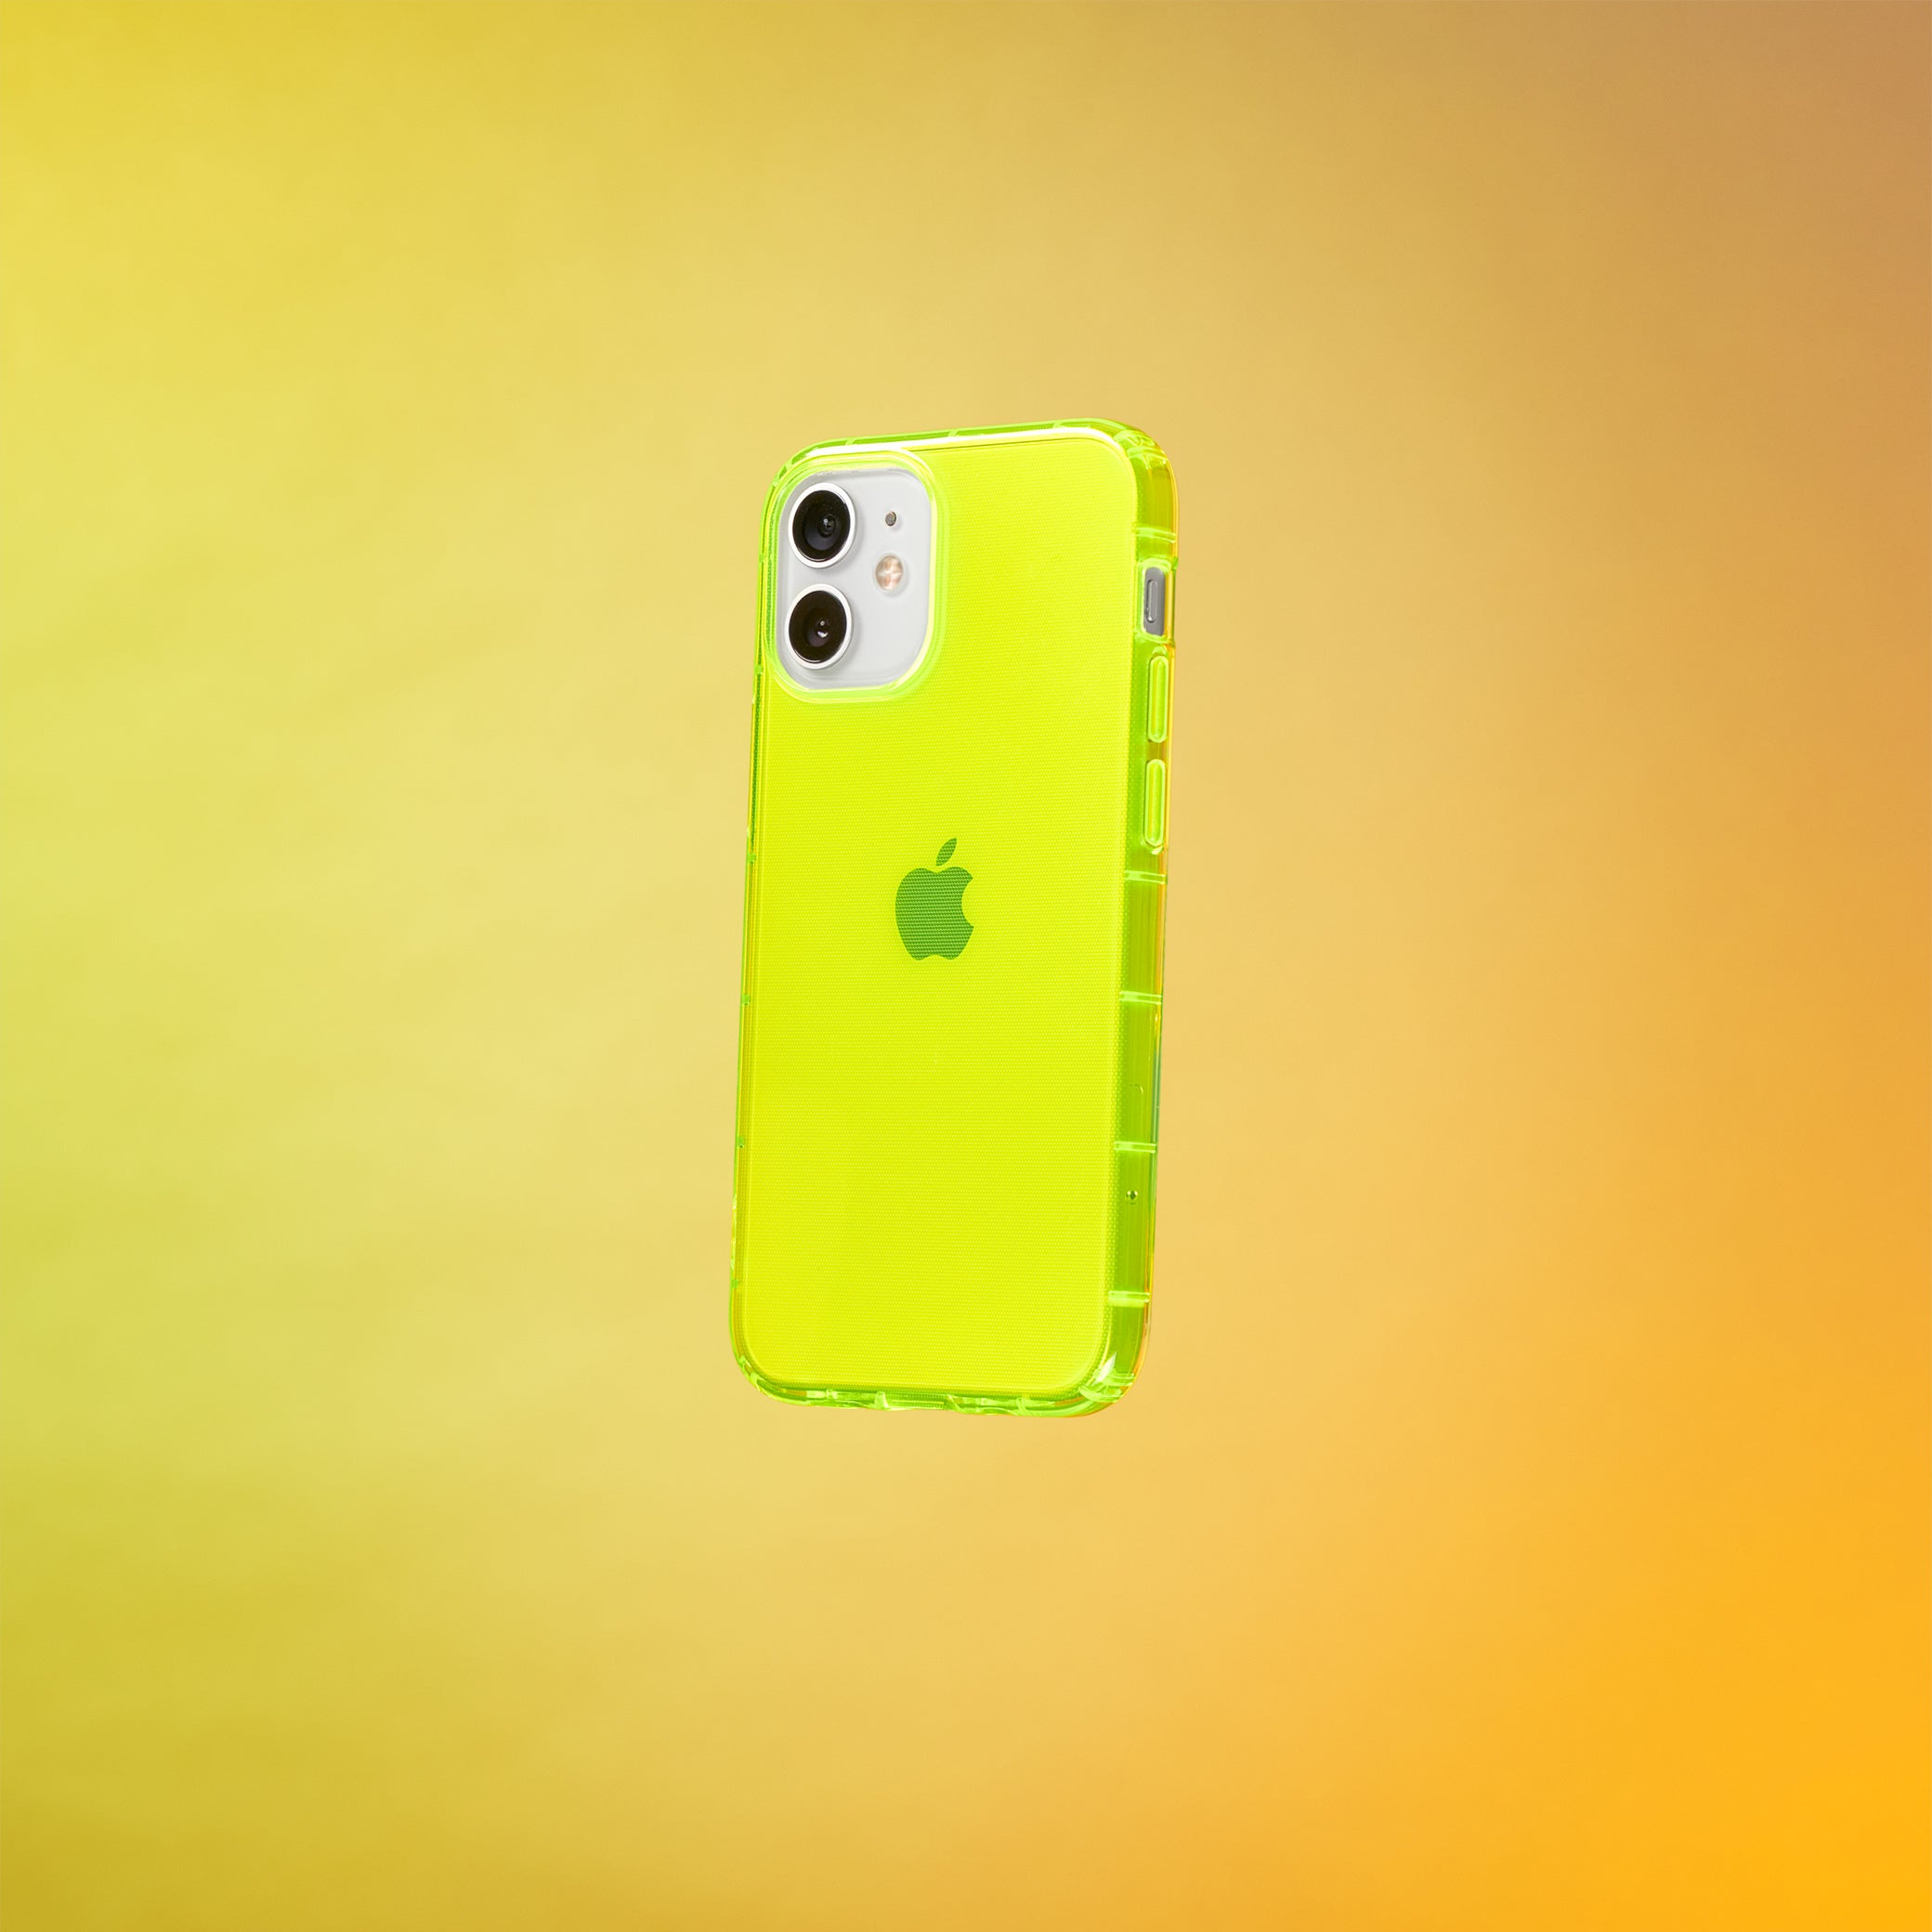 Highlighter Case for iPhone 12 Mini - Conspicuous Neon Yellow